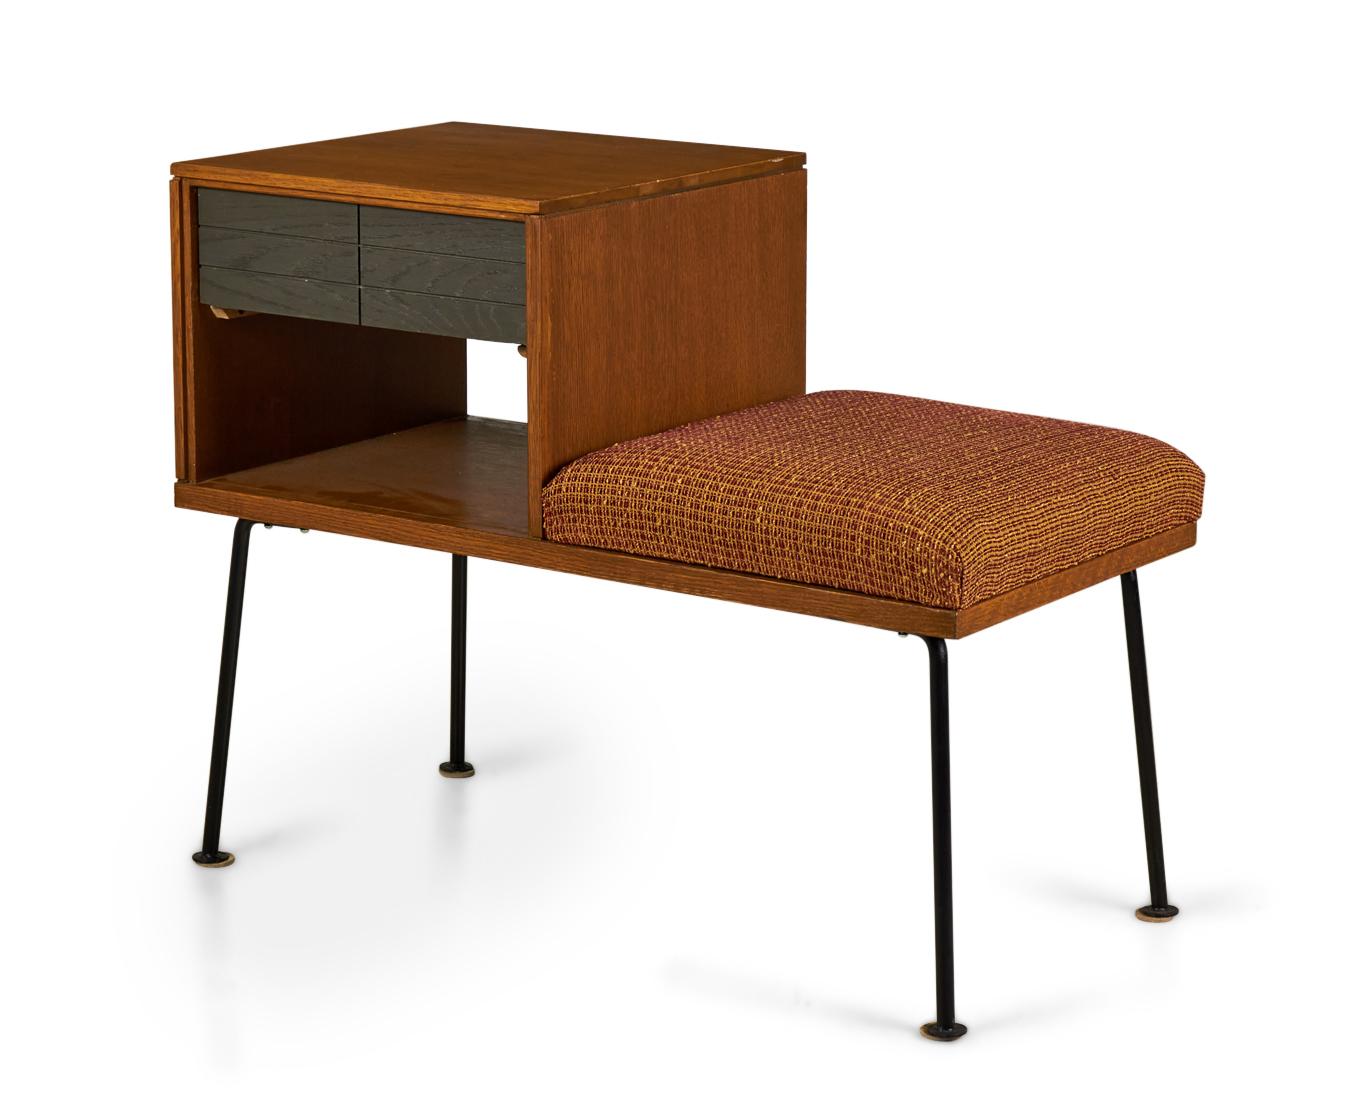 20th Century Raymond Loewy for Mengel Walnut, Iron and Orange Upholstery Telephone Bench For Sale